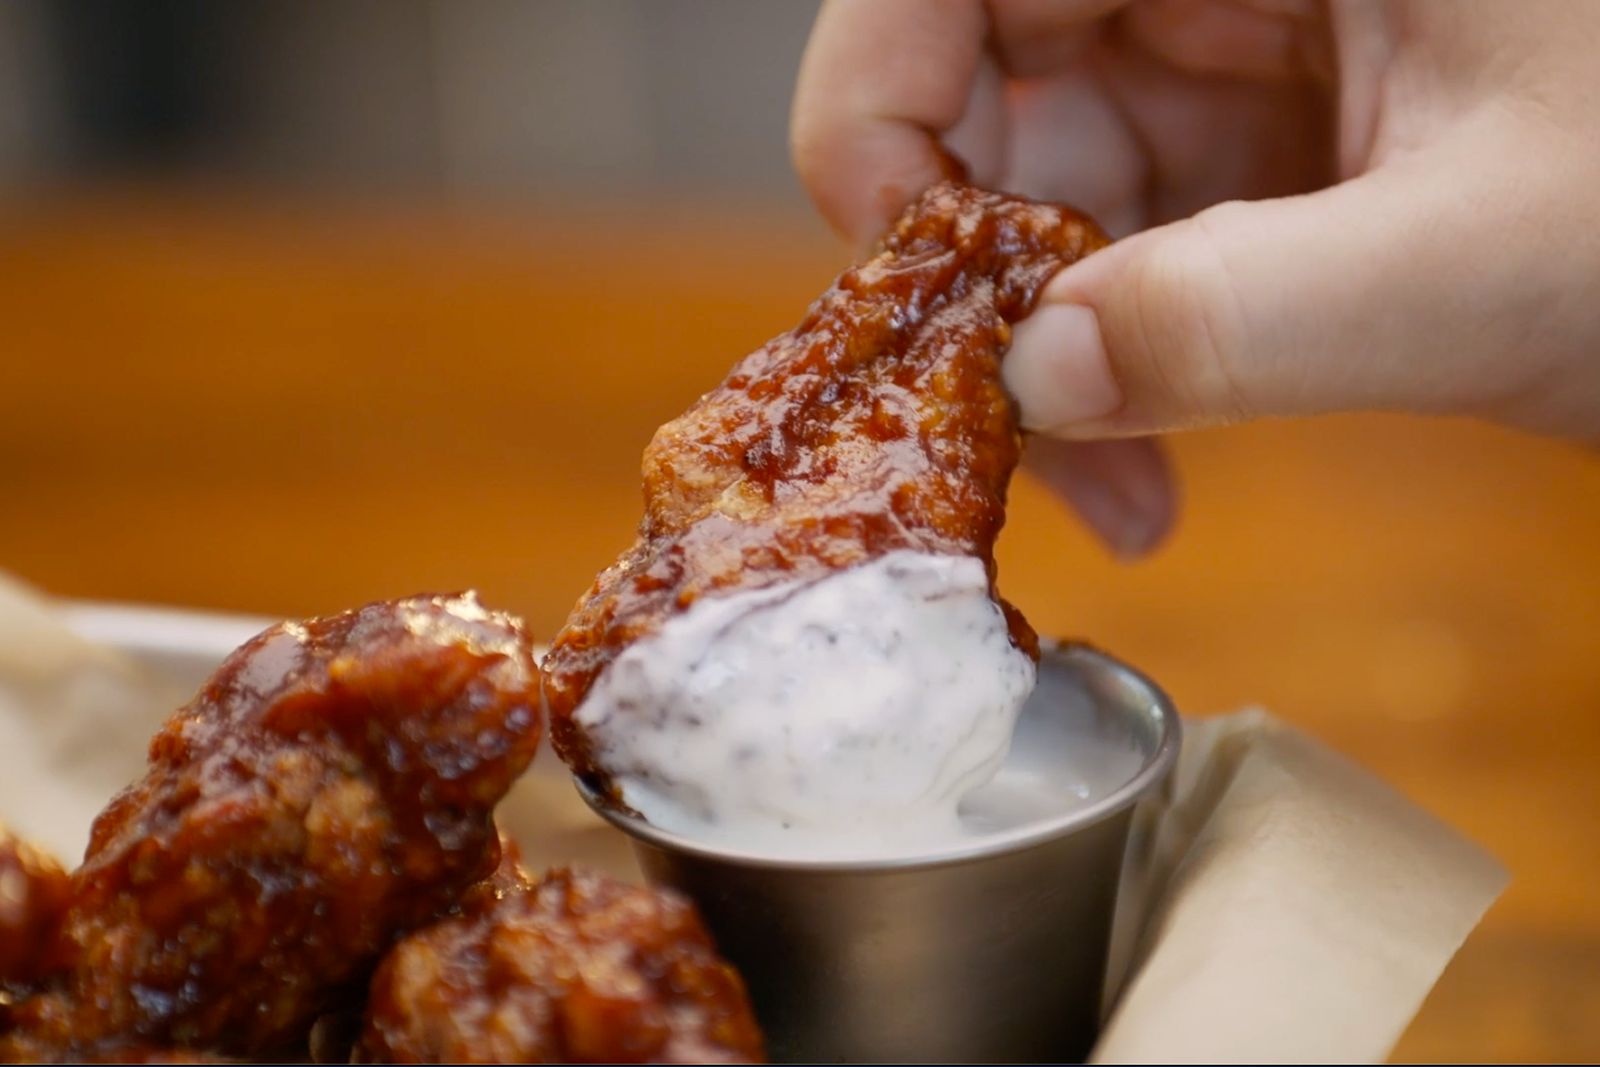 Hoots Wings Soars into Franchising, Signs 60-Unit Development Deal with AE Restaurant Group